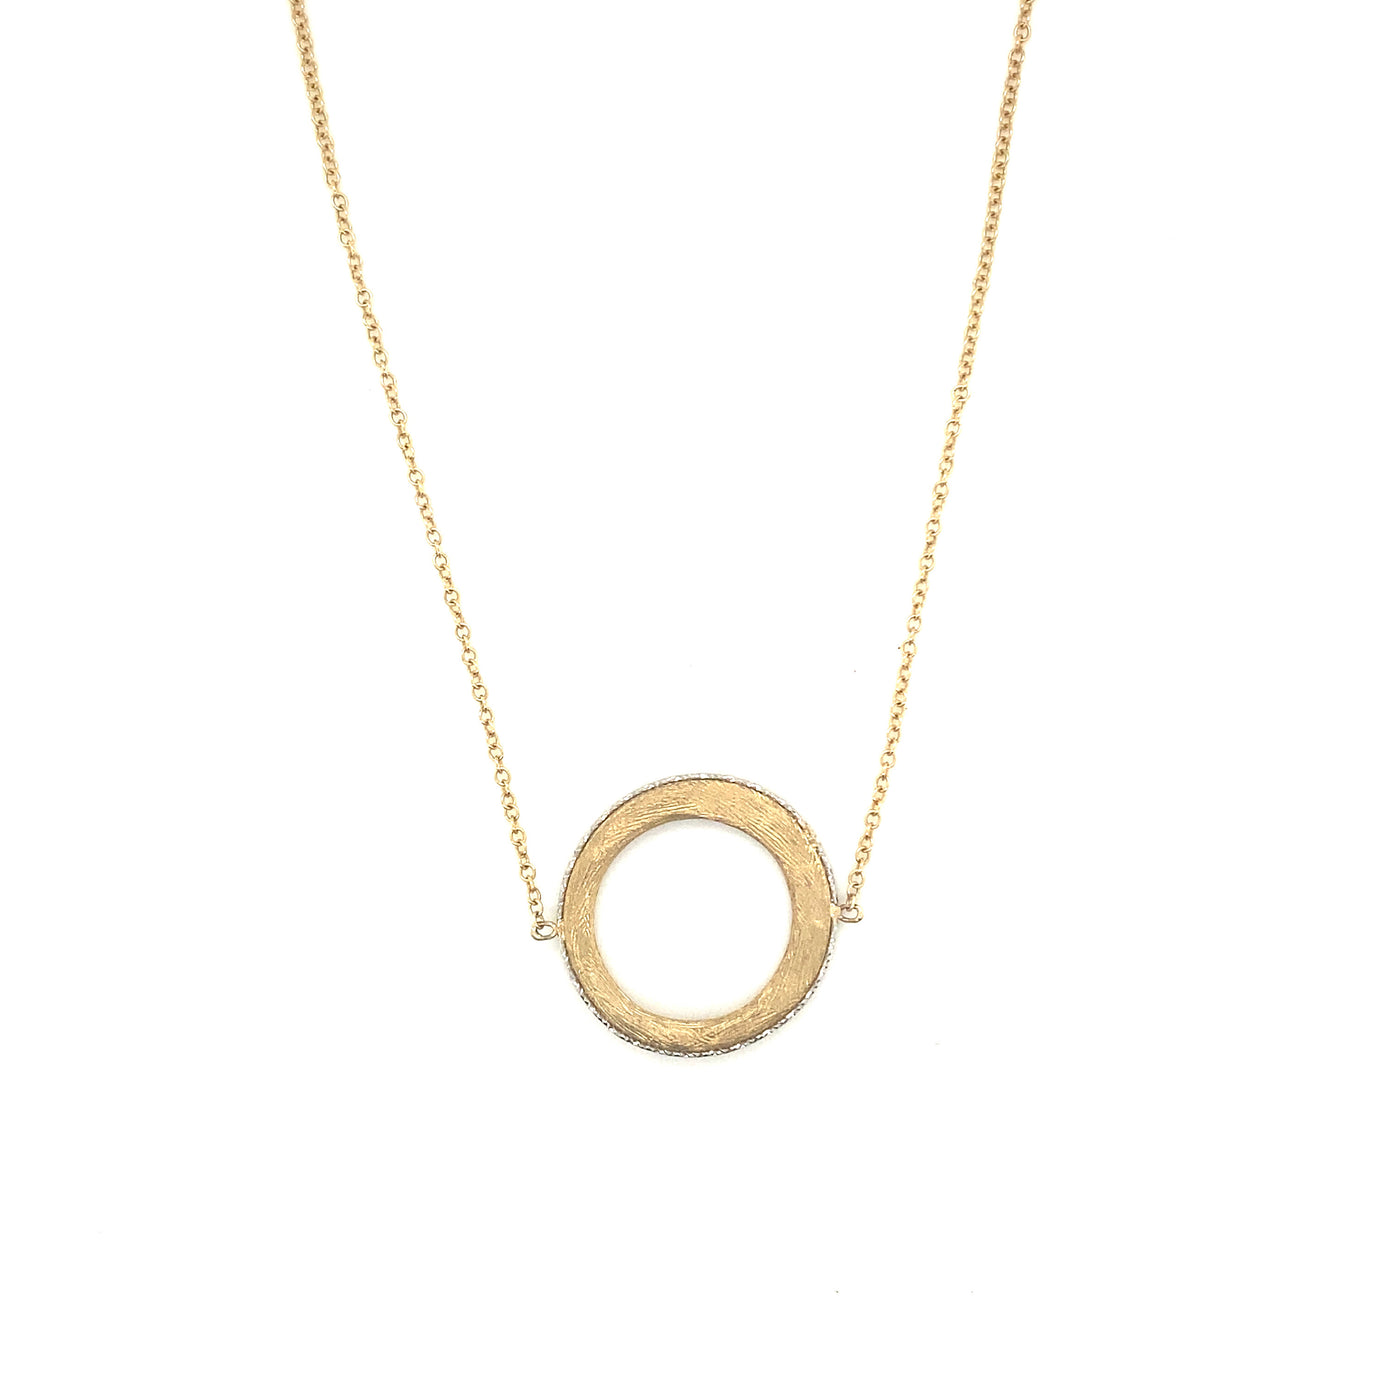 9ct yellow gold textured matte "Om" necklace, Italian designed and made